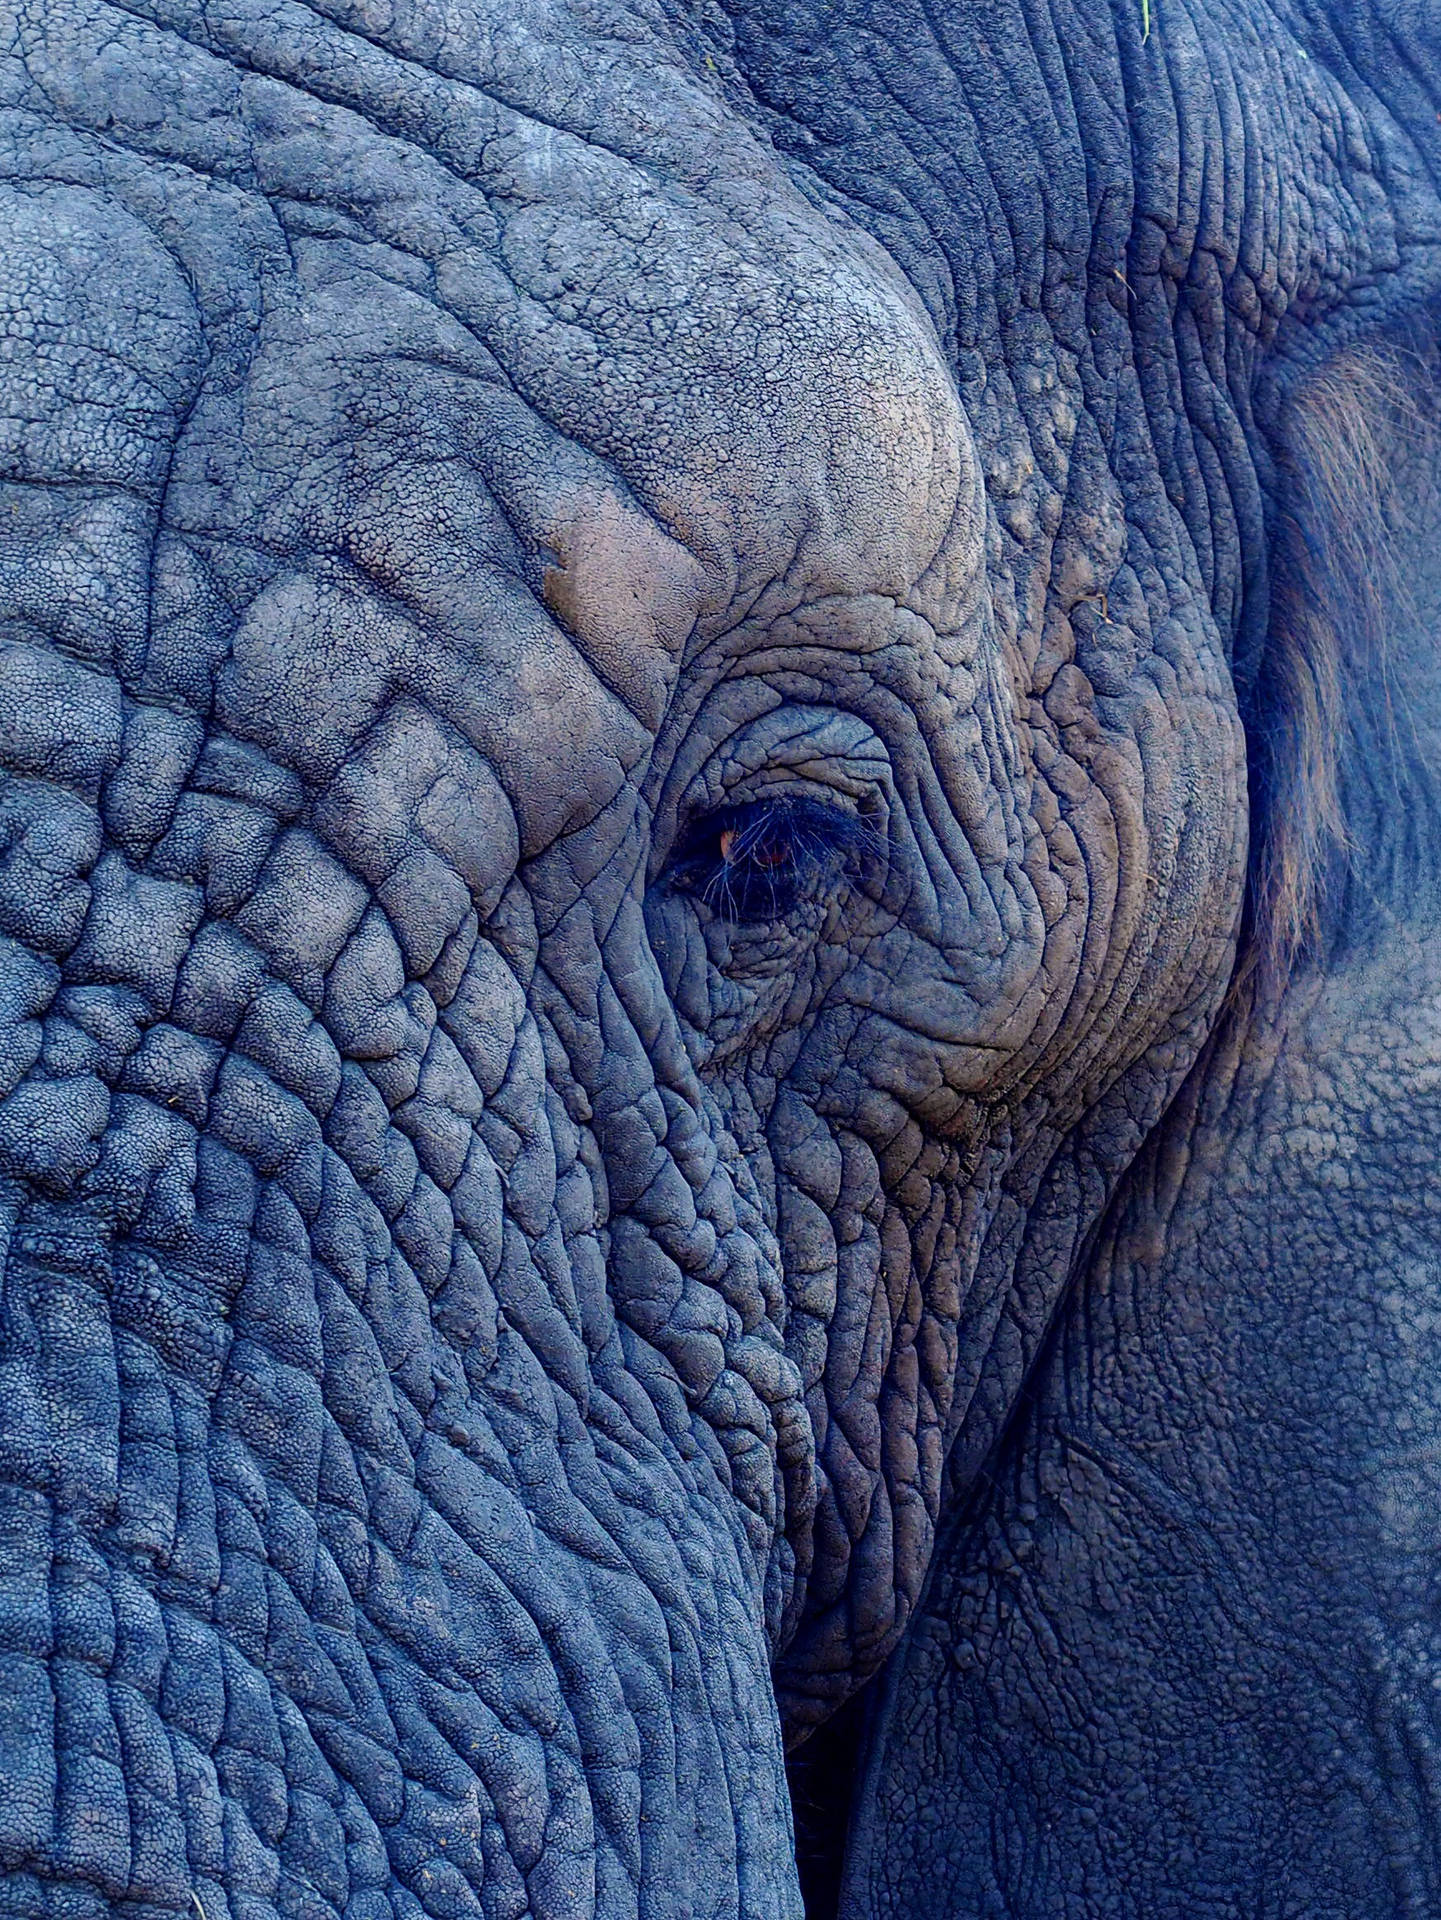 1747X2328 Elephant Wallpaper and Background